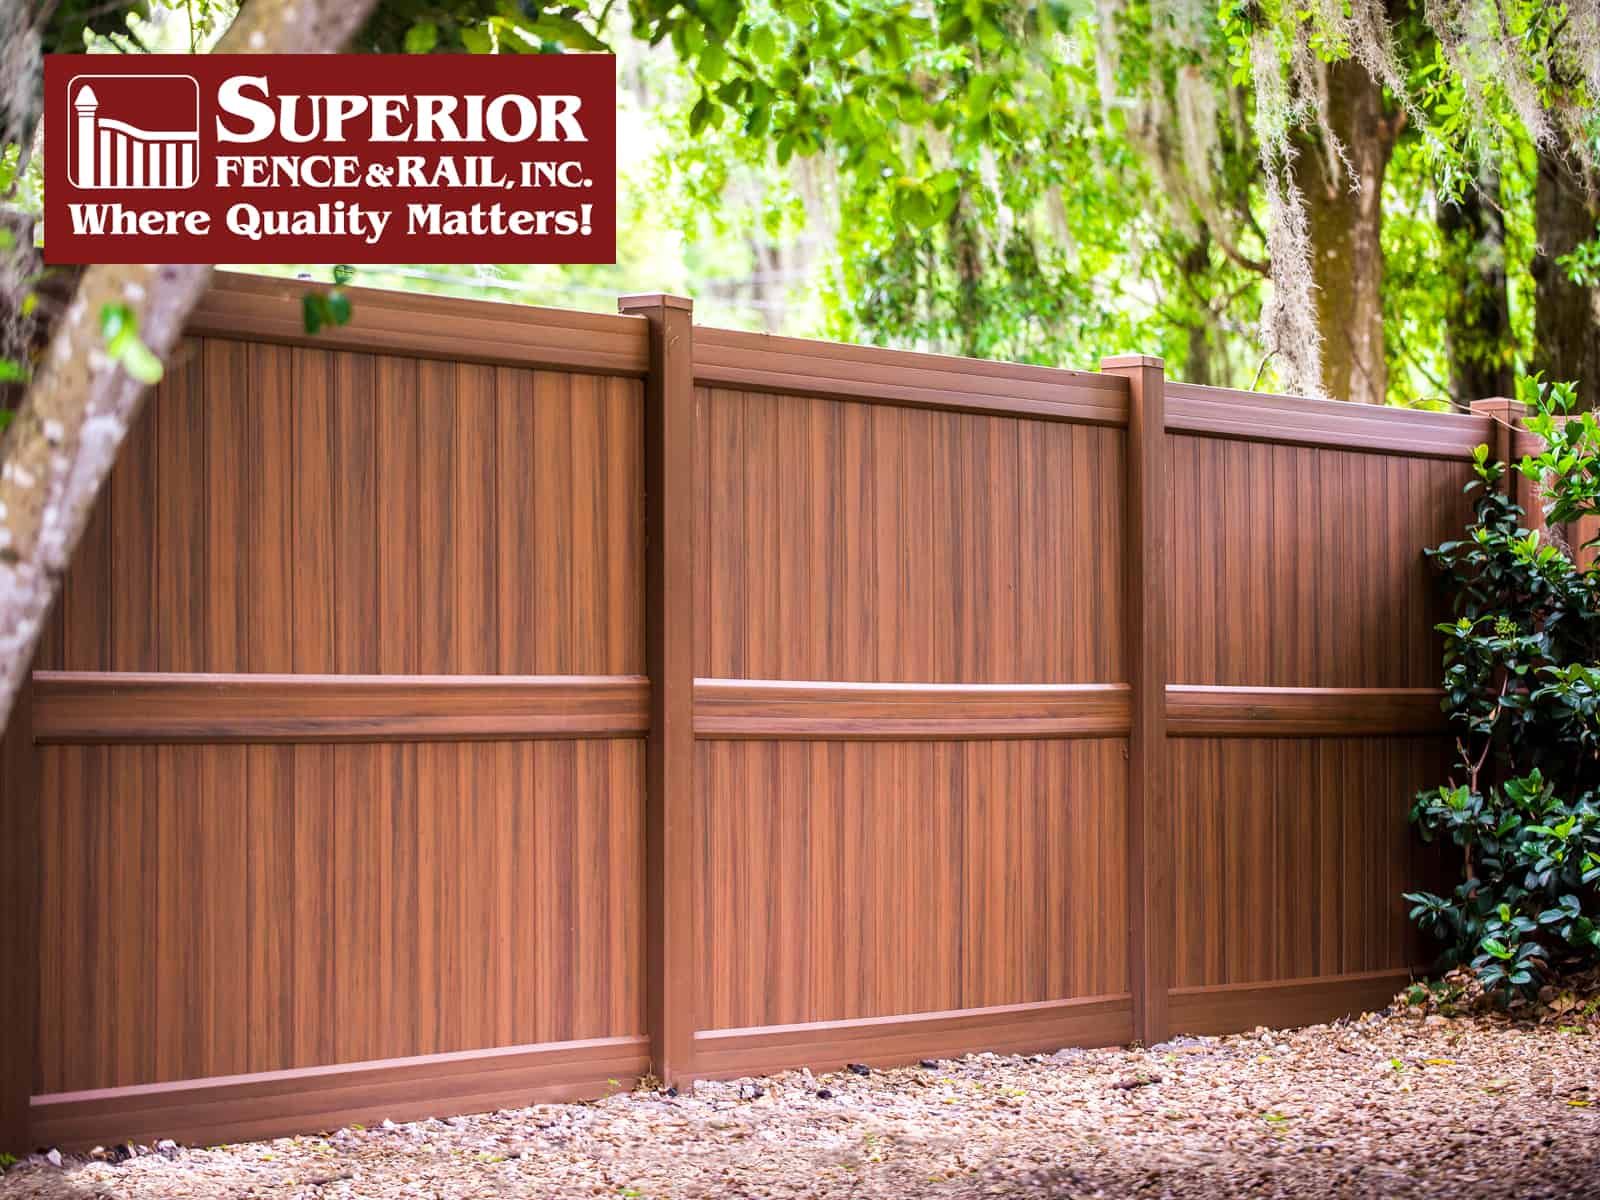 Saint Charles Fence Company Contractor